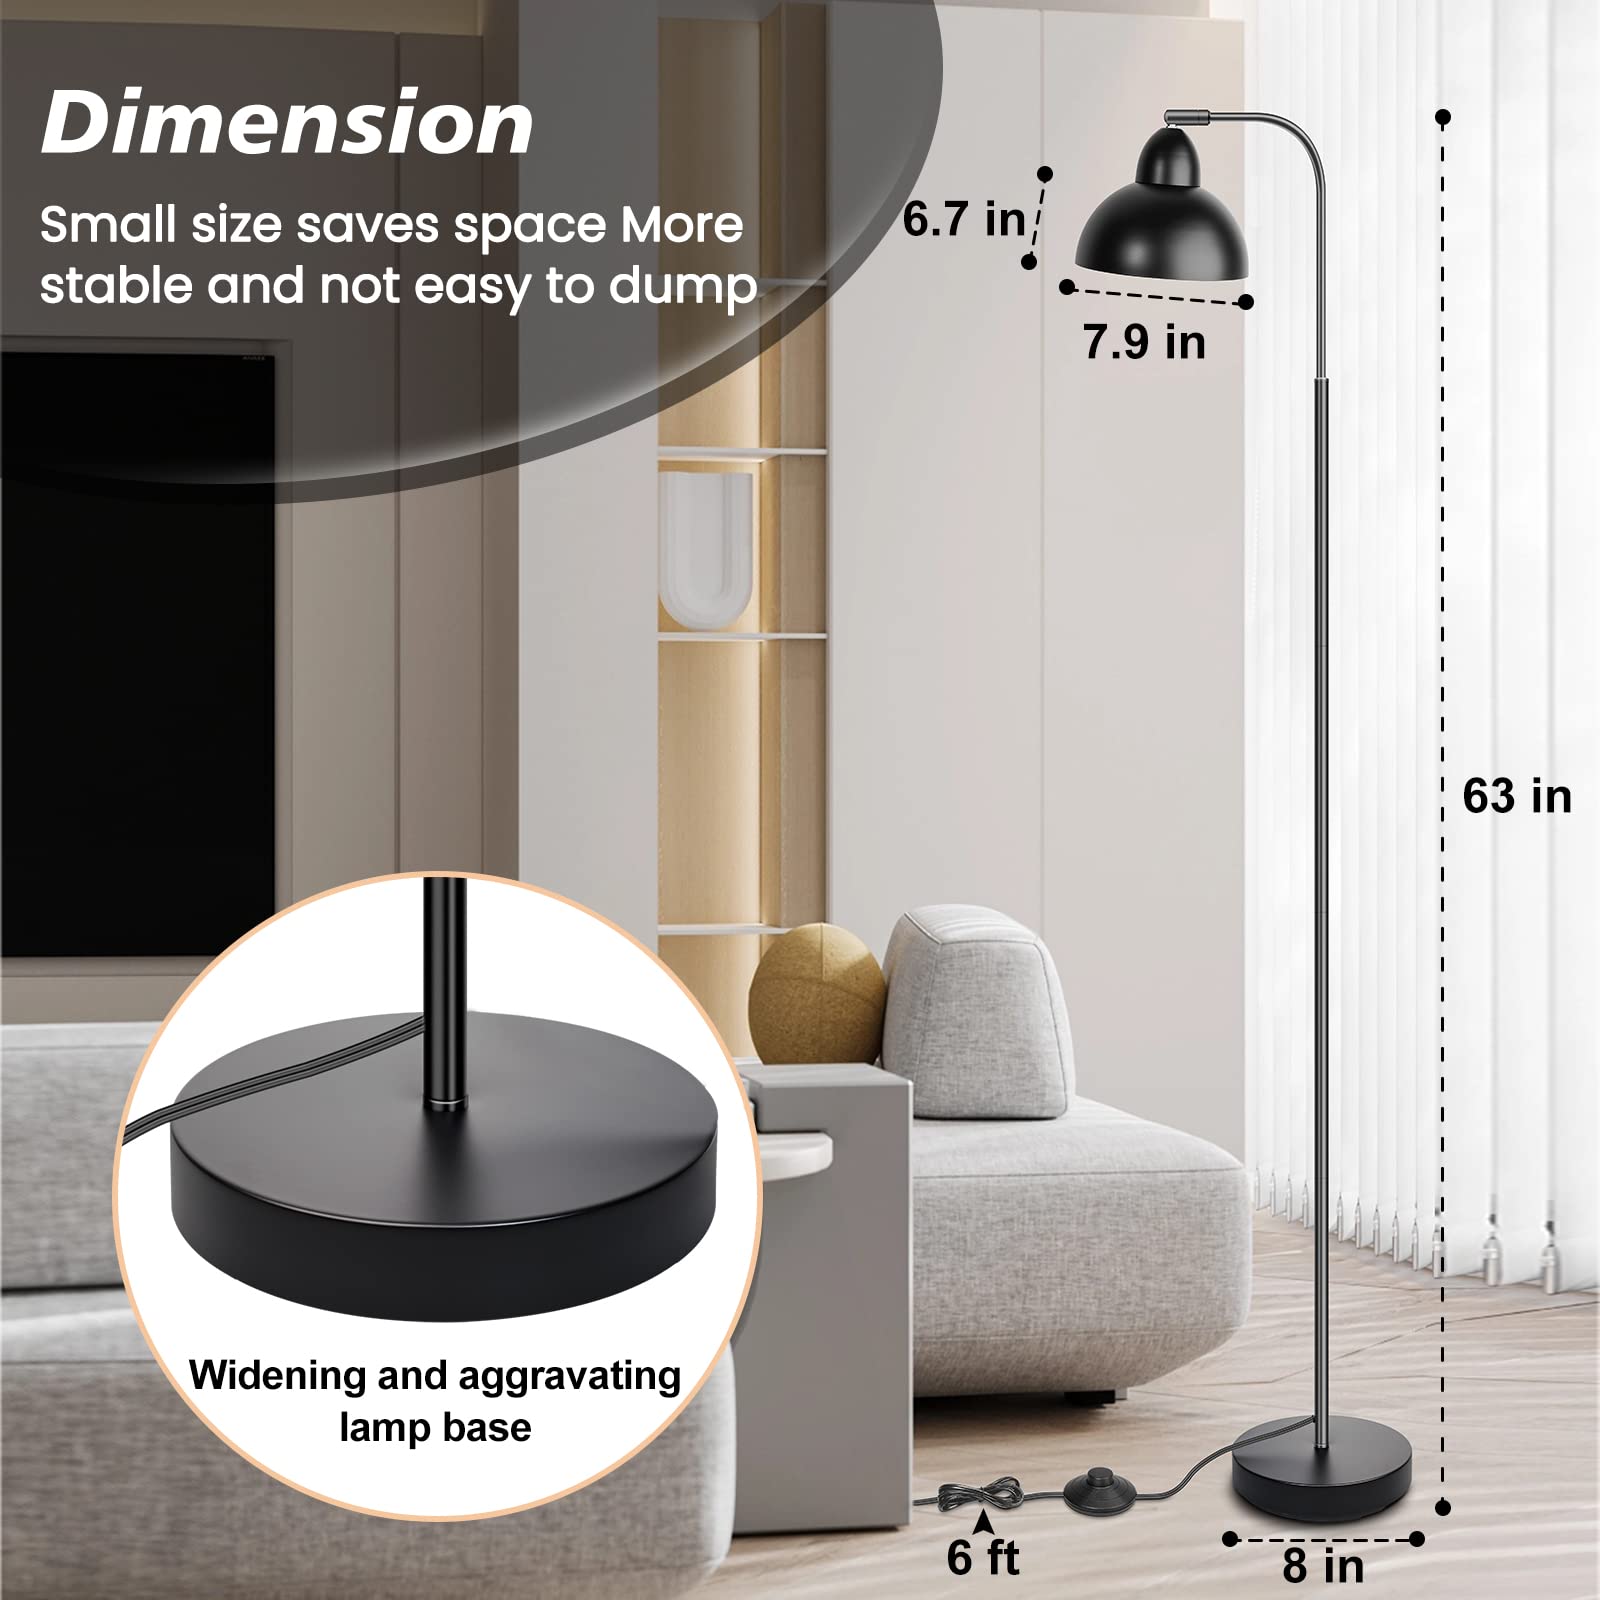 Feathmoo Industrial Floor Lamp with Black Metal Lampshade Floor Lamps for Reading, Minimalist Standing Lamps LED Light with 350° Adjustable Standard Tall Sofa Lamp for Living Room, Bedroom, Office